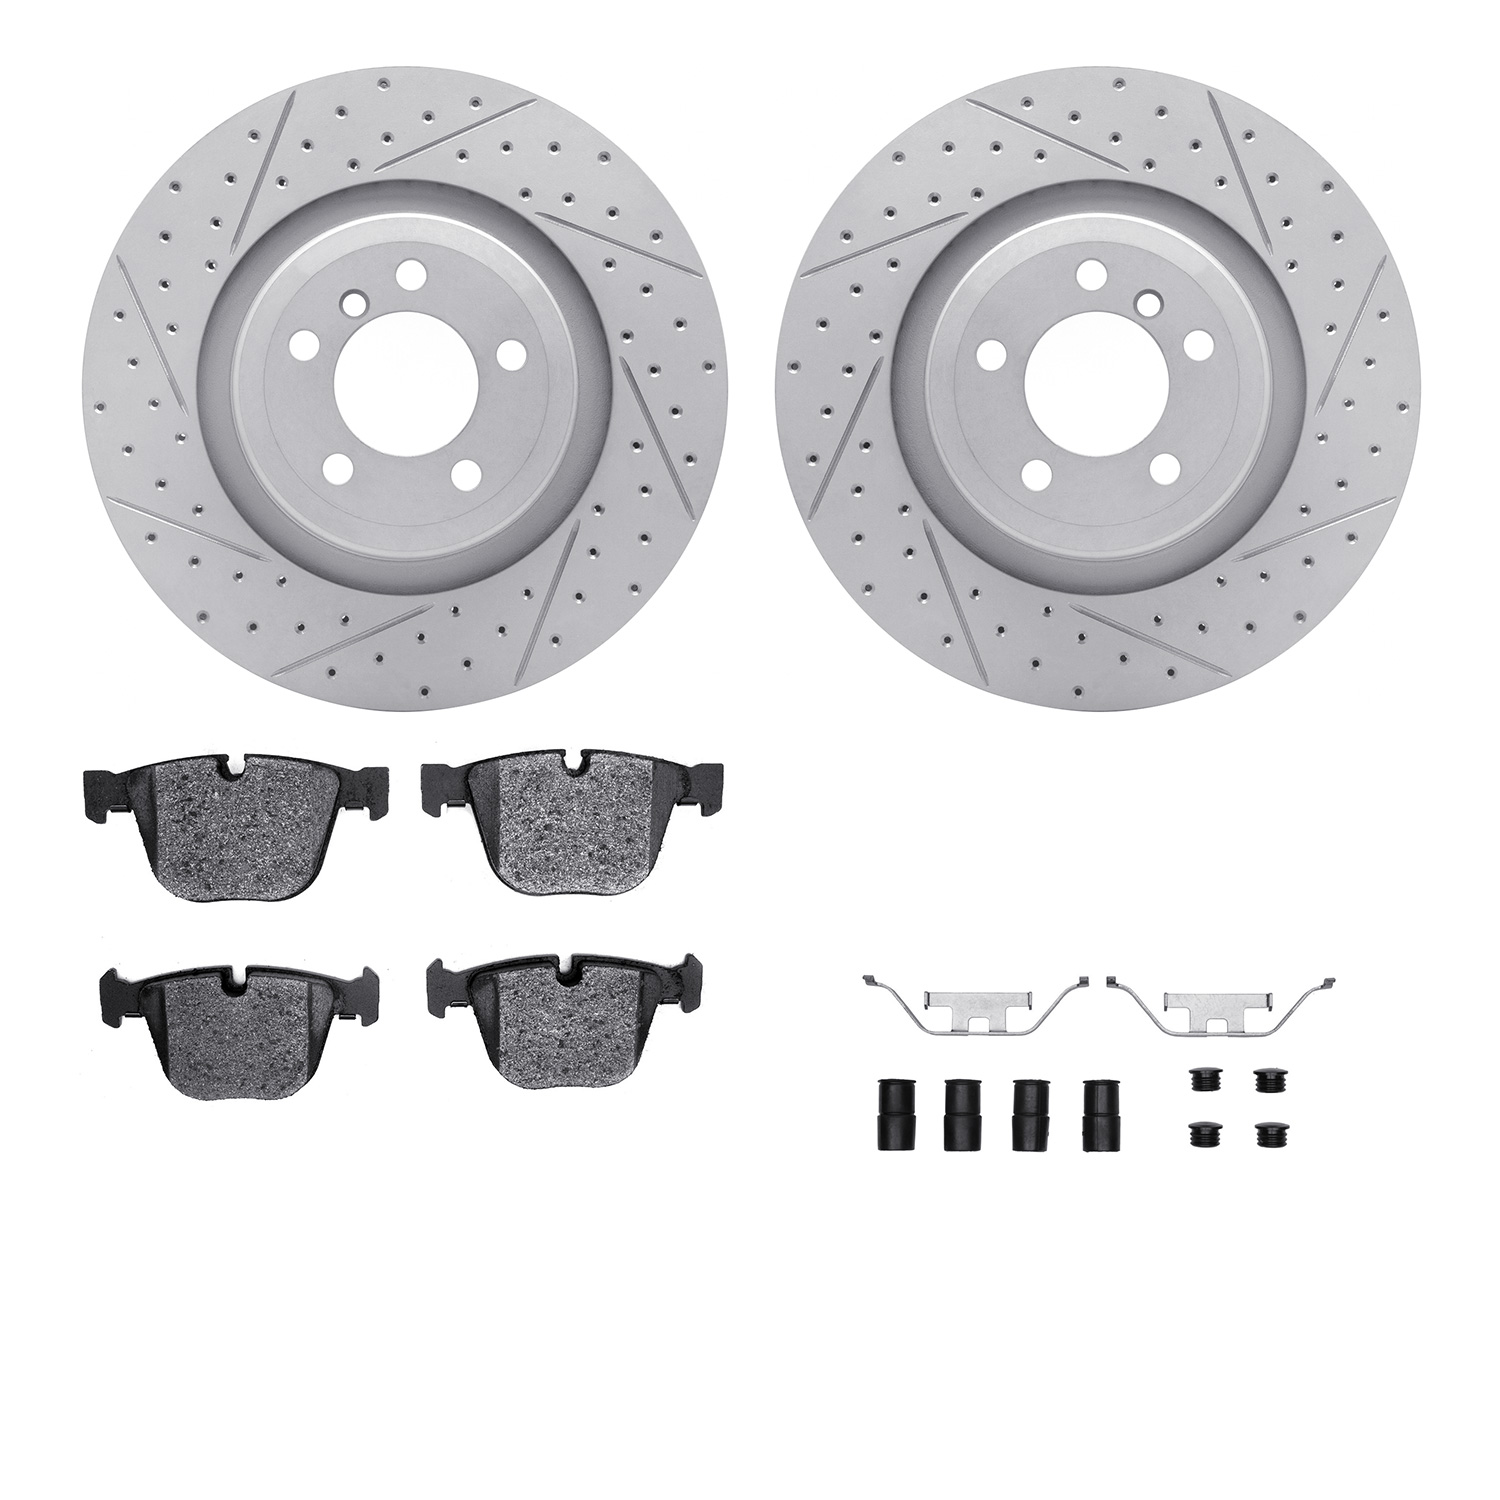 2512-31054 Geoperformance Drilled/Slotted Rotors w/5000 Advanced Brake Pads Kit & Hardware, 2007-2008 BMW, Position: Rear